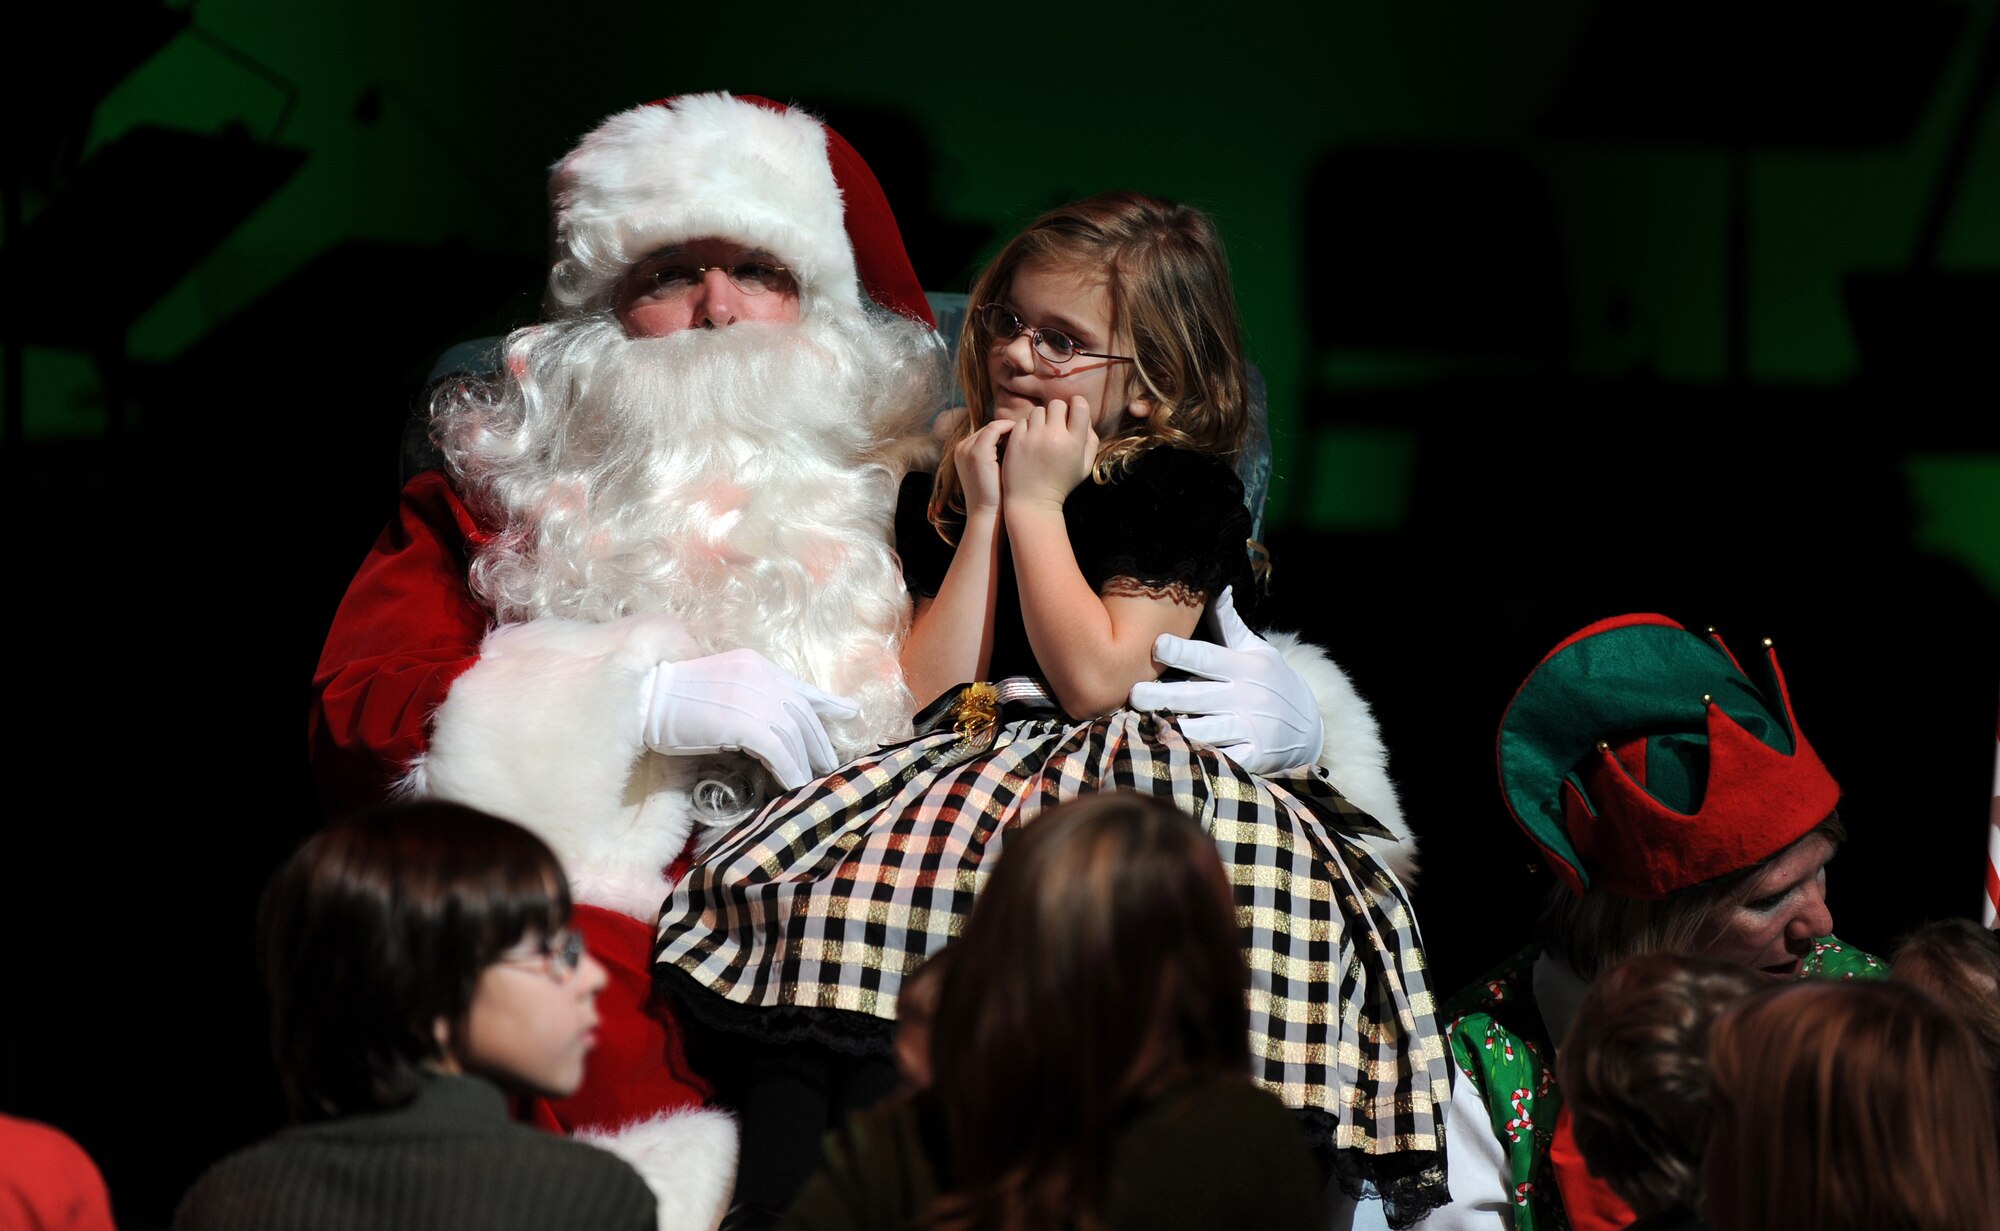 OFFUTT AIR FORCE BASE, Neb. -- Six-year-old Jaeli Cole, from Omaha Neb., had the best seat in the house when she got to sit with Santa on the Holland Perfroming Arts Center stage. Mrs. Clause read the children the story "Why Christmas Trees Aren't Perfect," Dec. 12 as part of the 22nd annual Heartland of America Band's hoiday concert.  The band performed to a full capacity audience of roughly 2,000 metro area residents as part of a four day concert series.

U.S. Air Force Photo by Josh Plueger